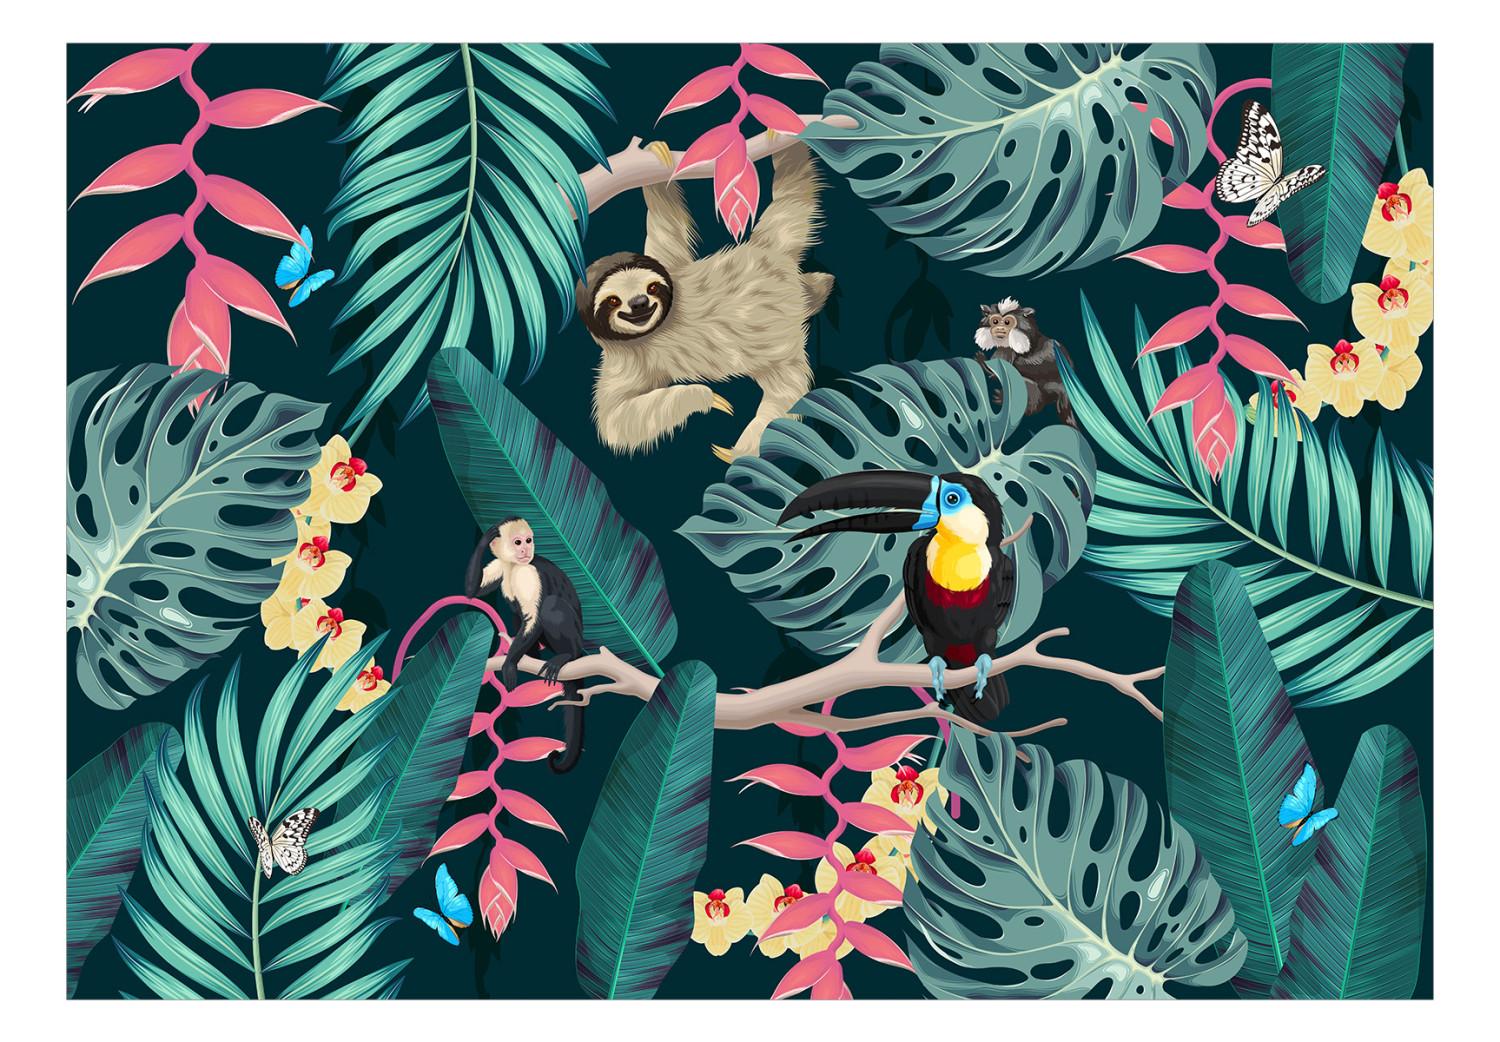 Fotomural decorativo Sloth and Monkeys - Exotic Jungle With Birds on a Dark Background